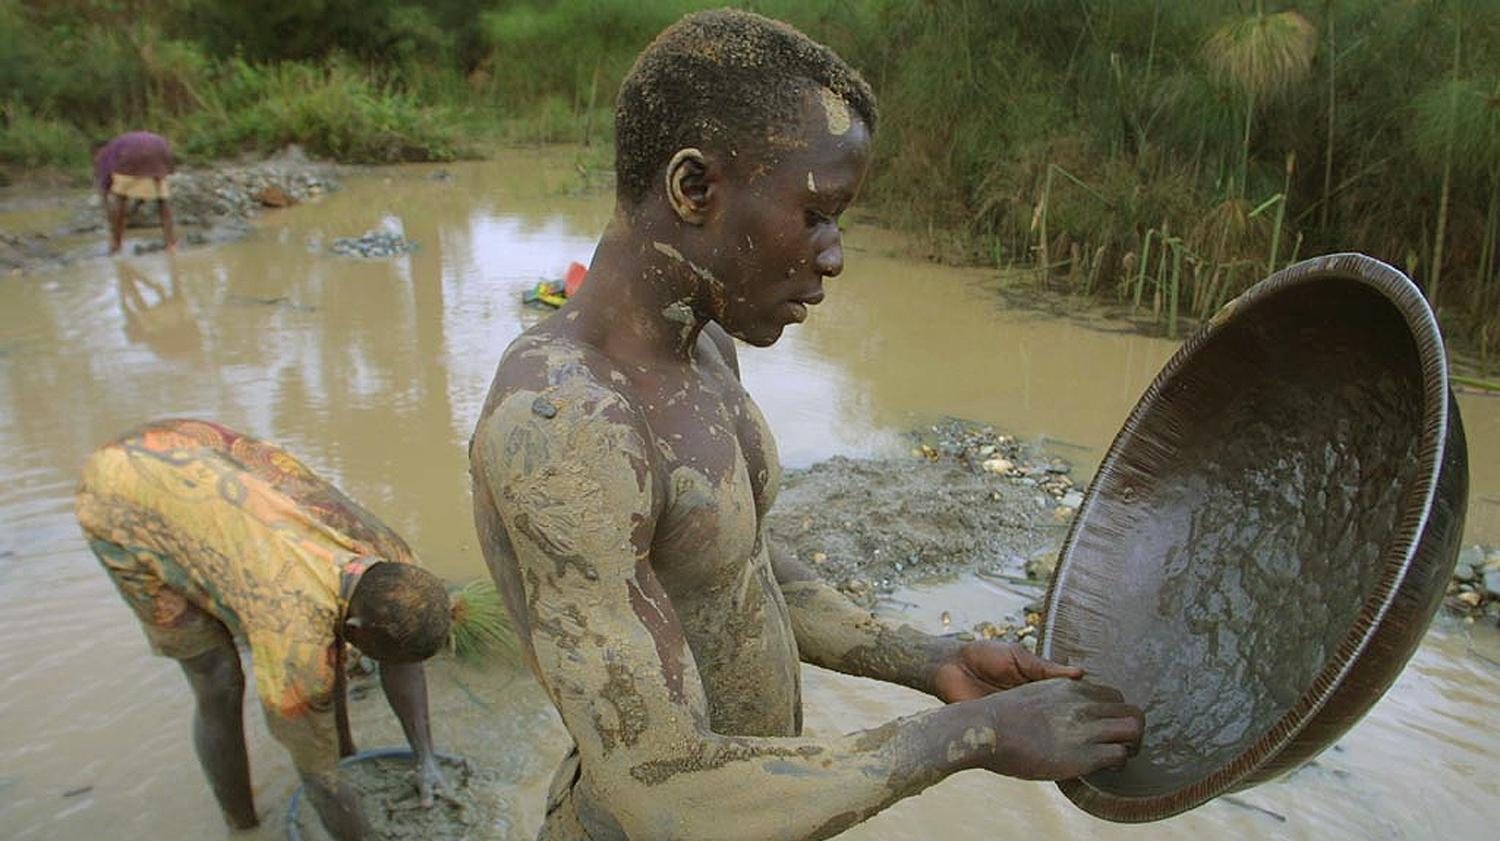 A Congolese teenager pans for gold near the town of Nizi in the Ituri region of the Congo, 14 October 2003. The gold trade in the area has diminished due to the ongoing war in the region.
AFP PHOTO/SIMON MAINA